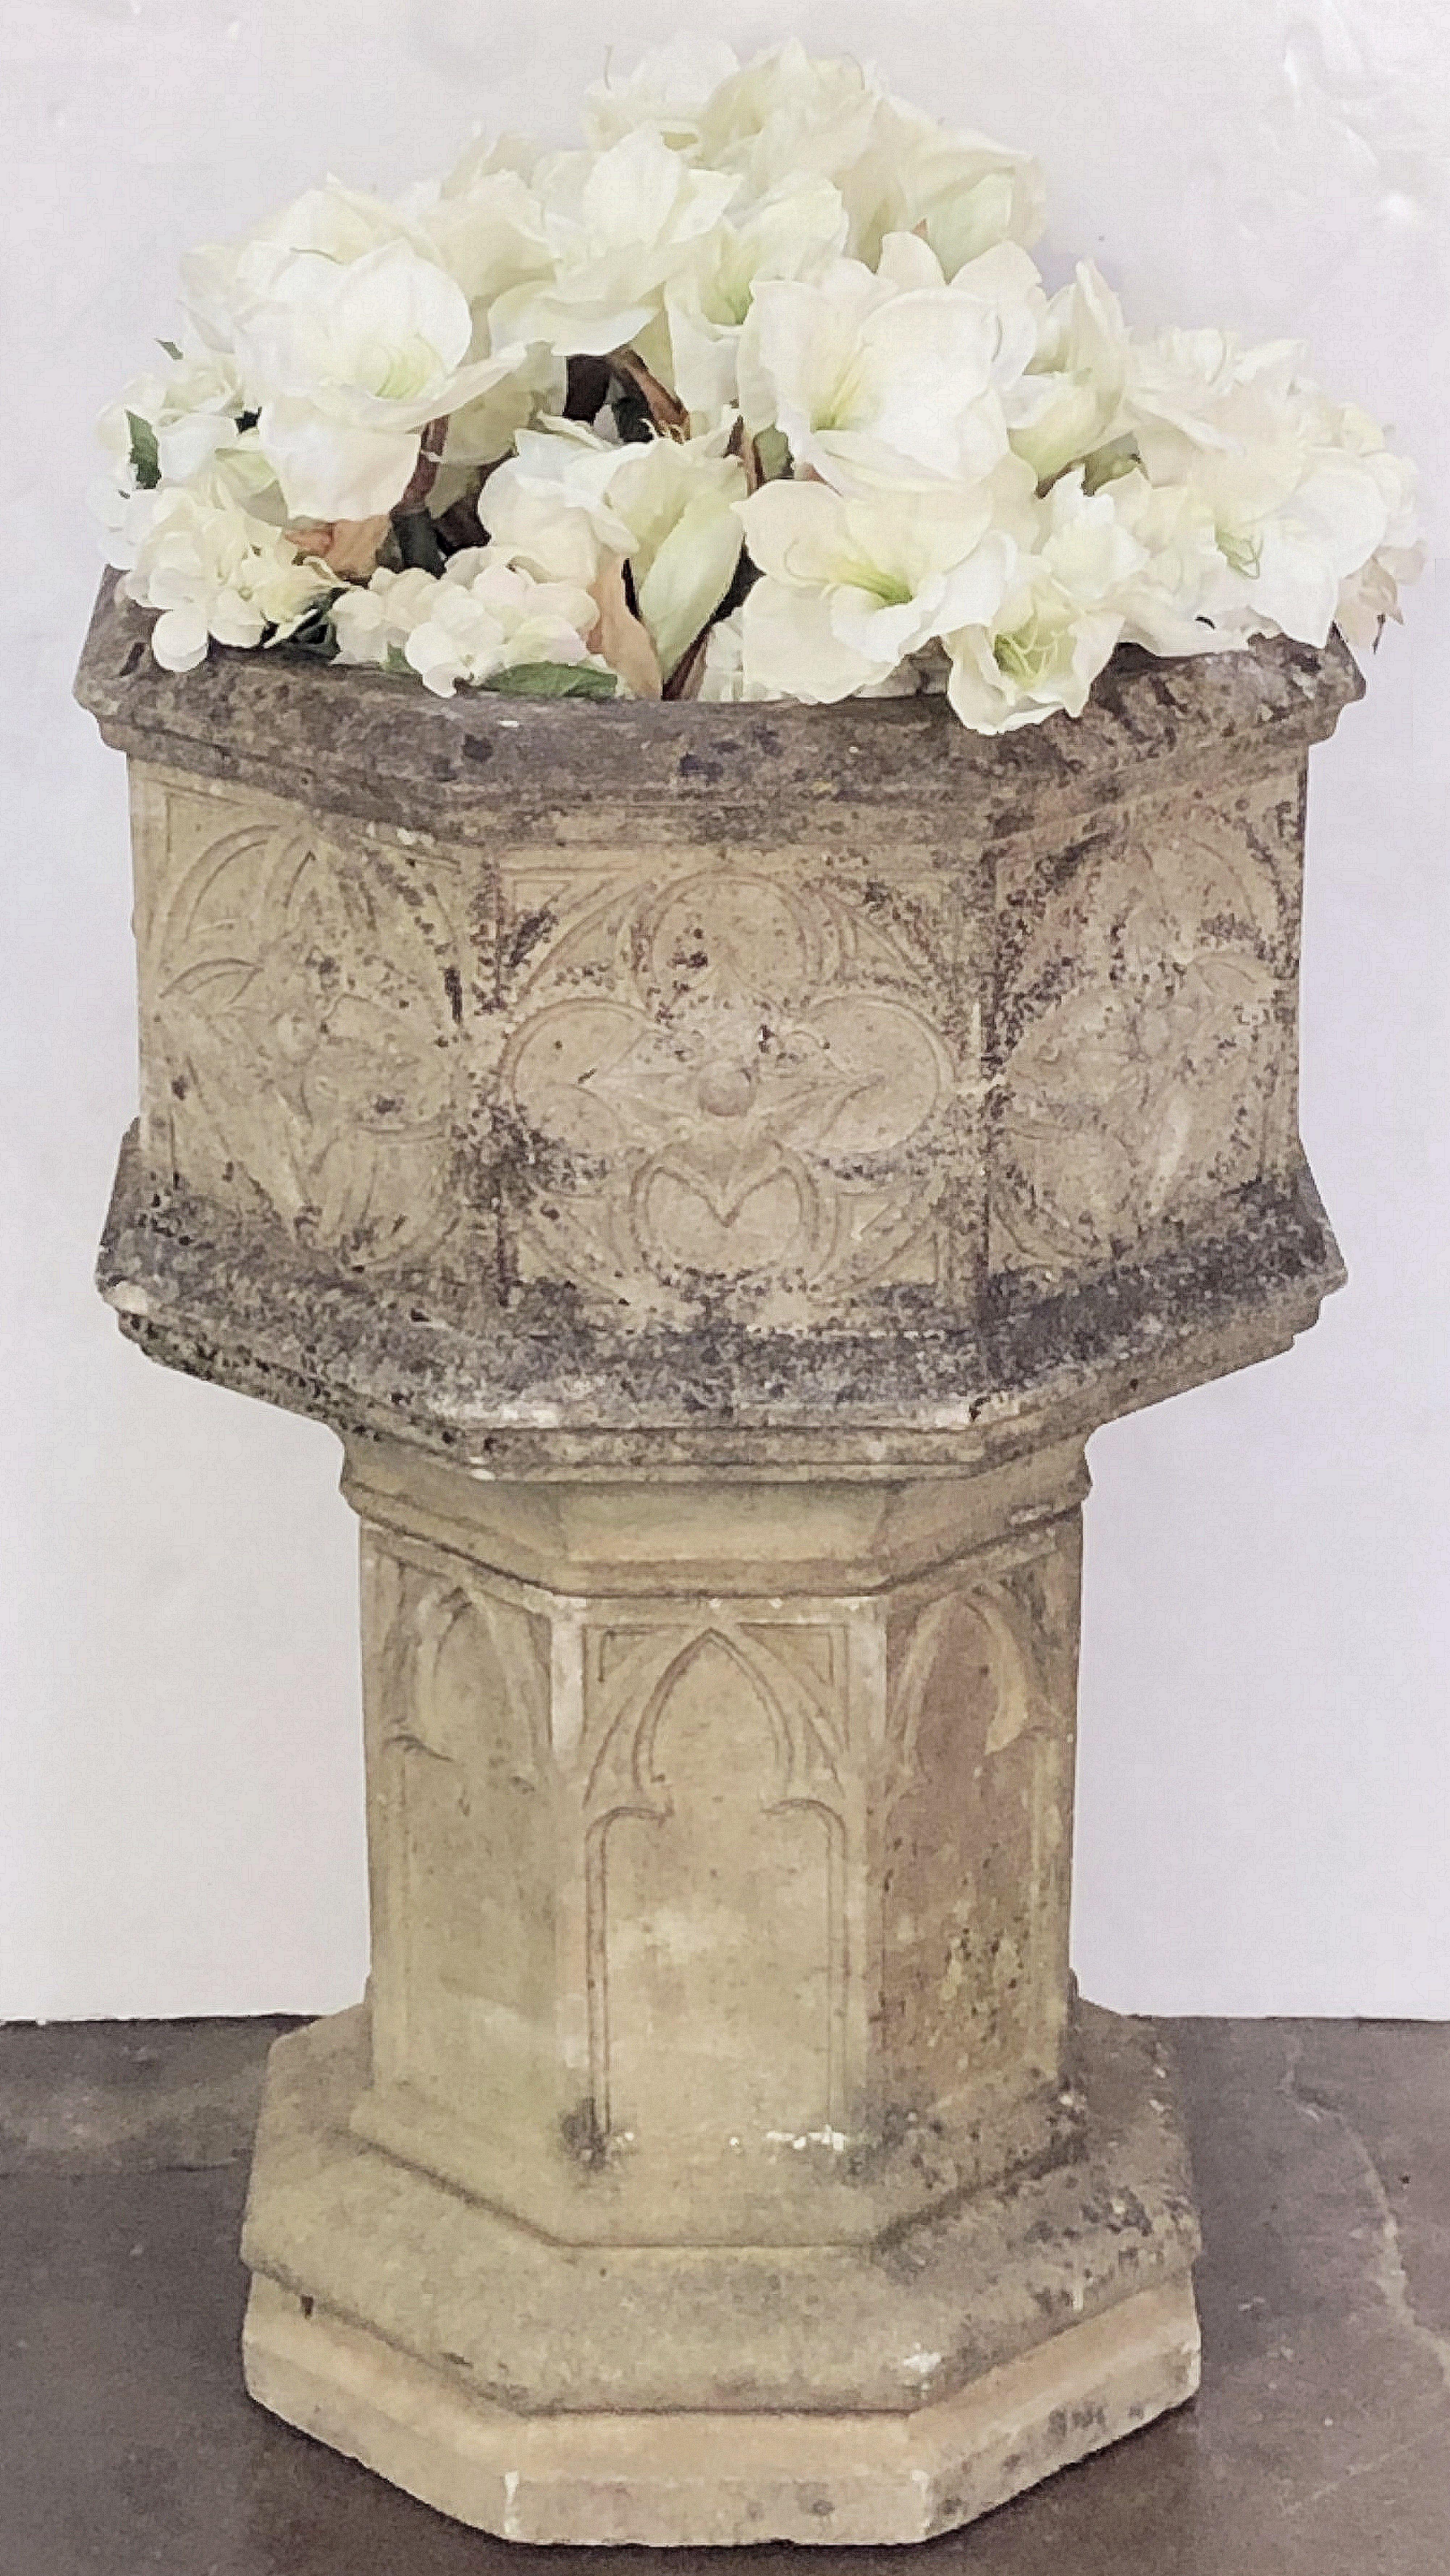 A fine English octagonal planter or garden urn of composition stone in the Gothic style, featuring a large eight-sided pot for planting with a decorative quatrefoil design around the circumference, set upon a fitted eight-sided pedestal column base